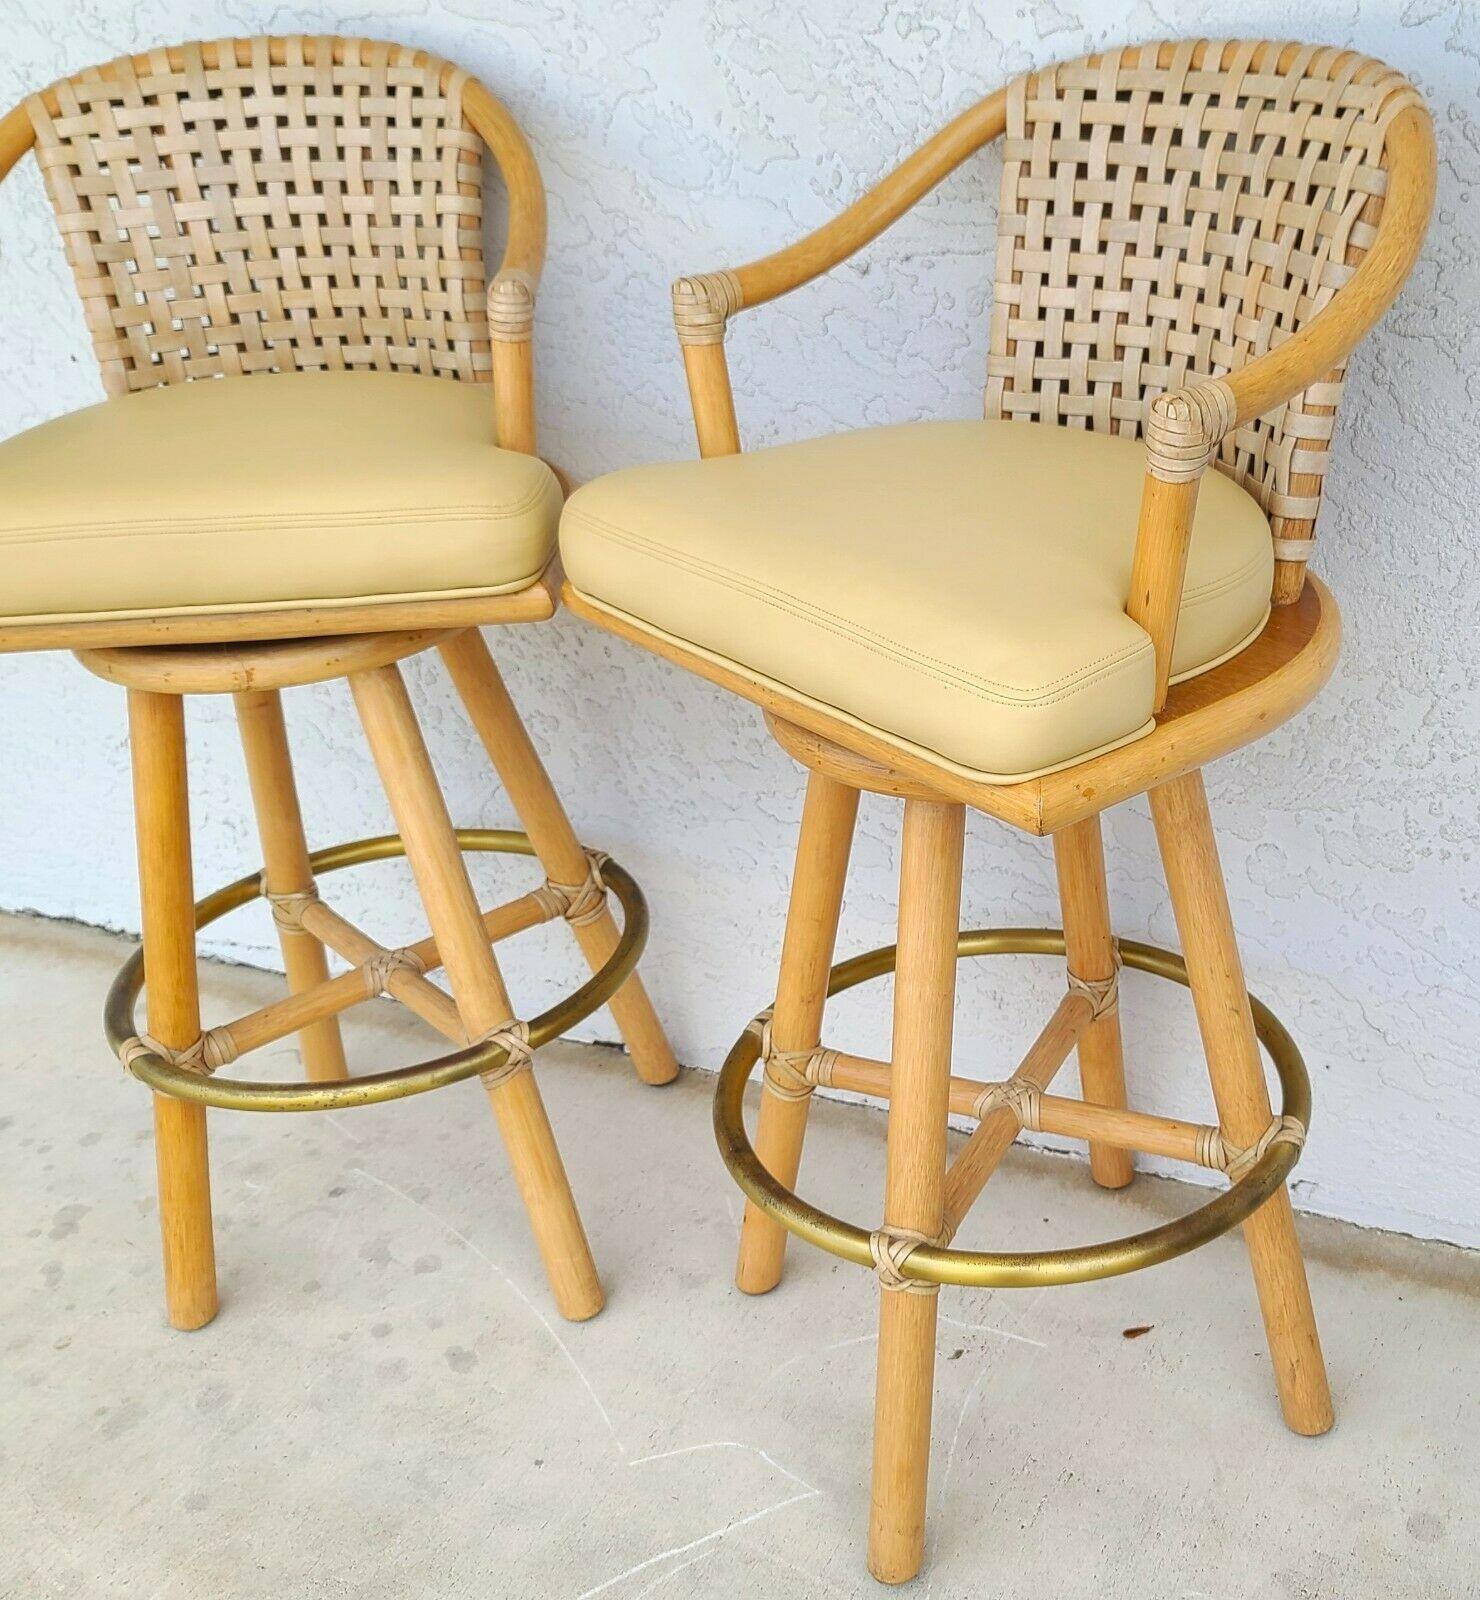 For FULL item description be sure to click on CONTINUE READING at the bottom of this listing.

Offering One Of Our Recent Palm Beach Estate Fine Furniture Acquisitions Of A
Pair of McGuire Laced Leather Cerused Rattan Swivel